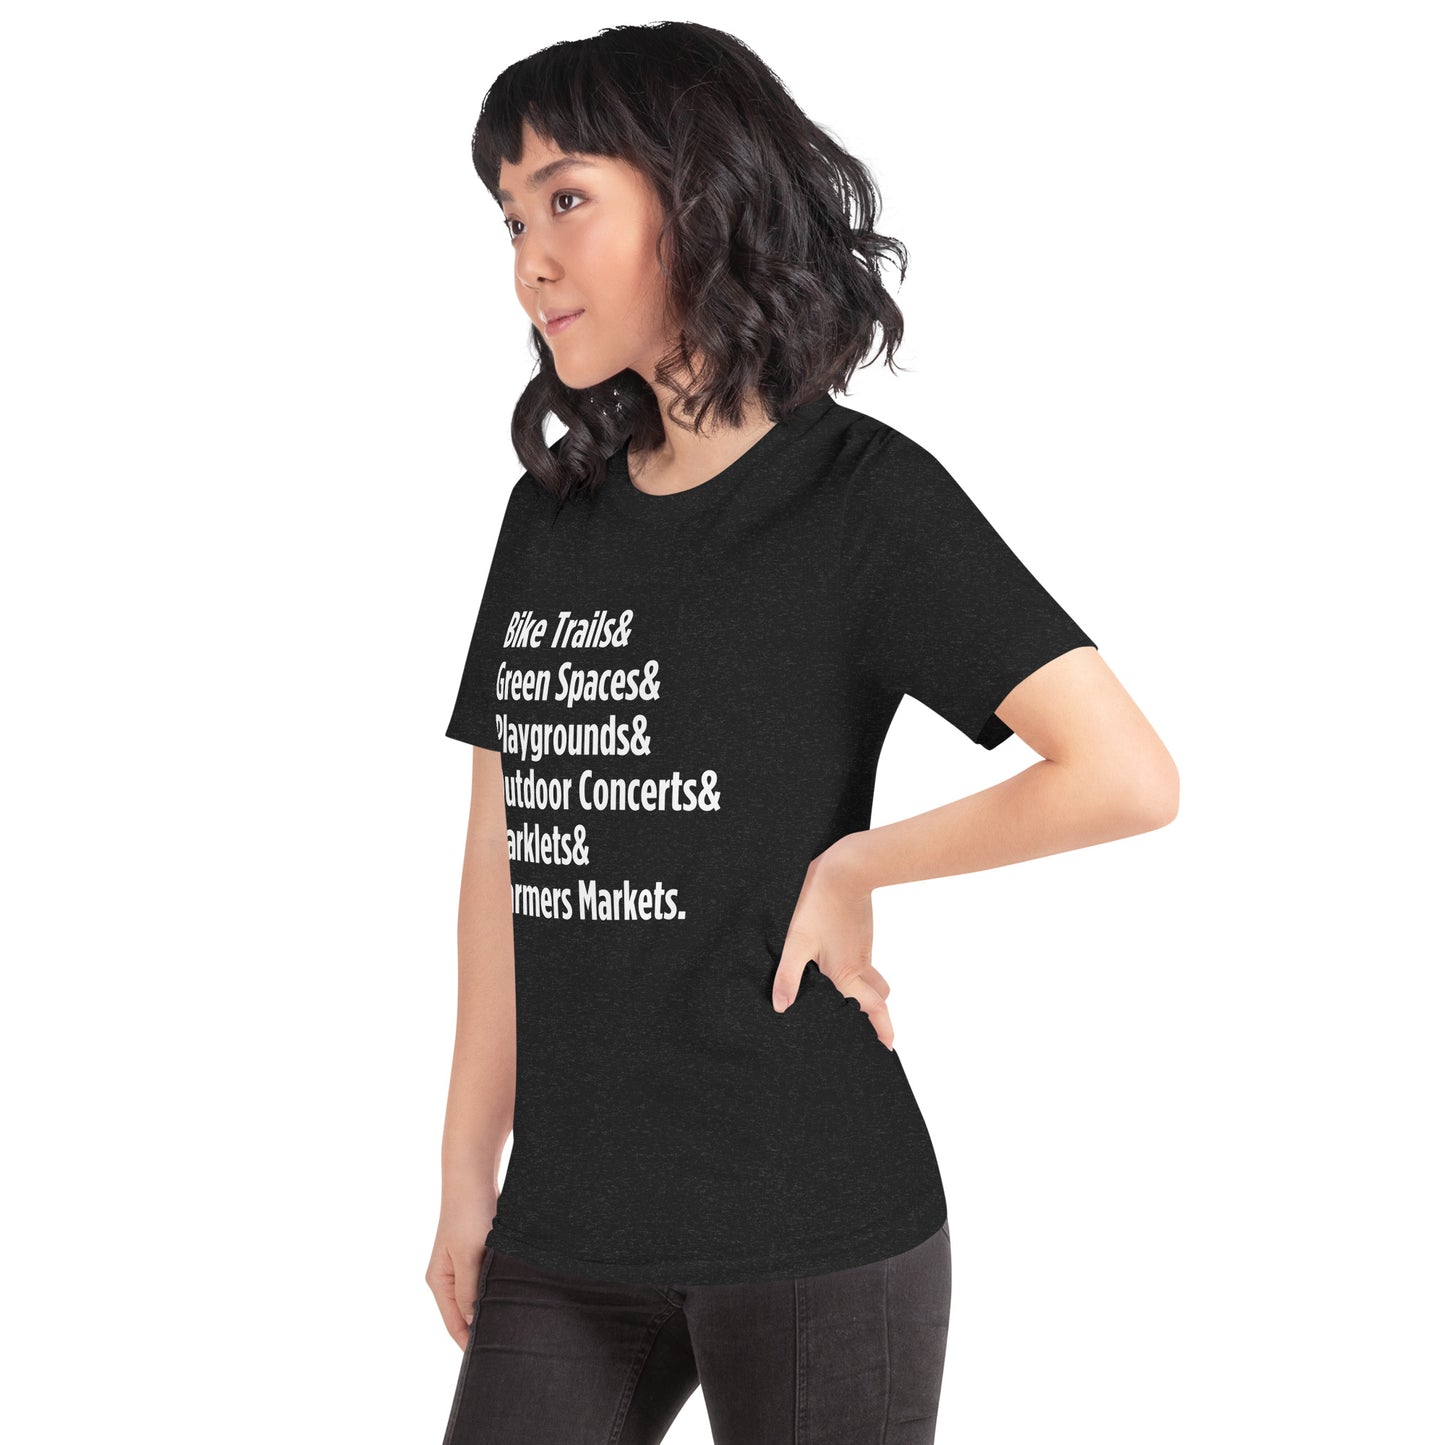 "Only on Main Street" (Greenspaces) Customizable Unisex T-shirt